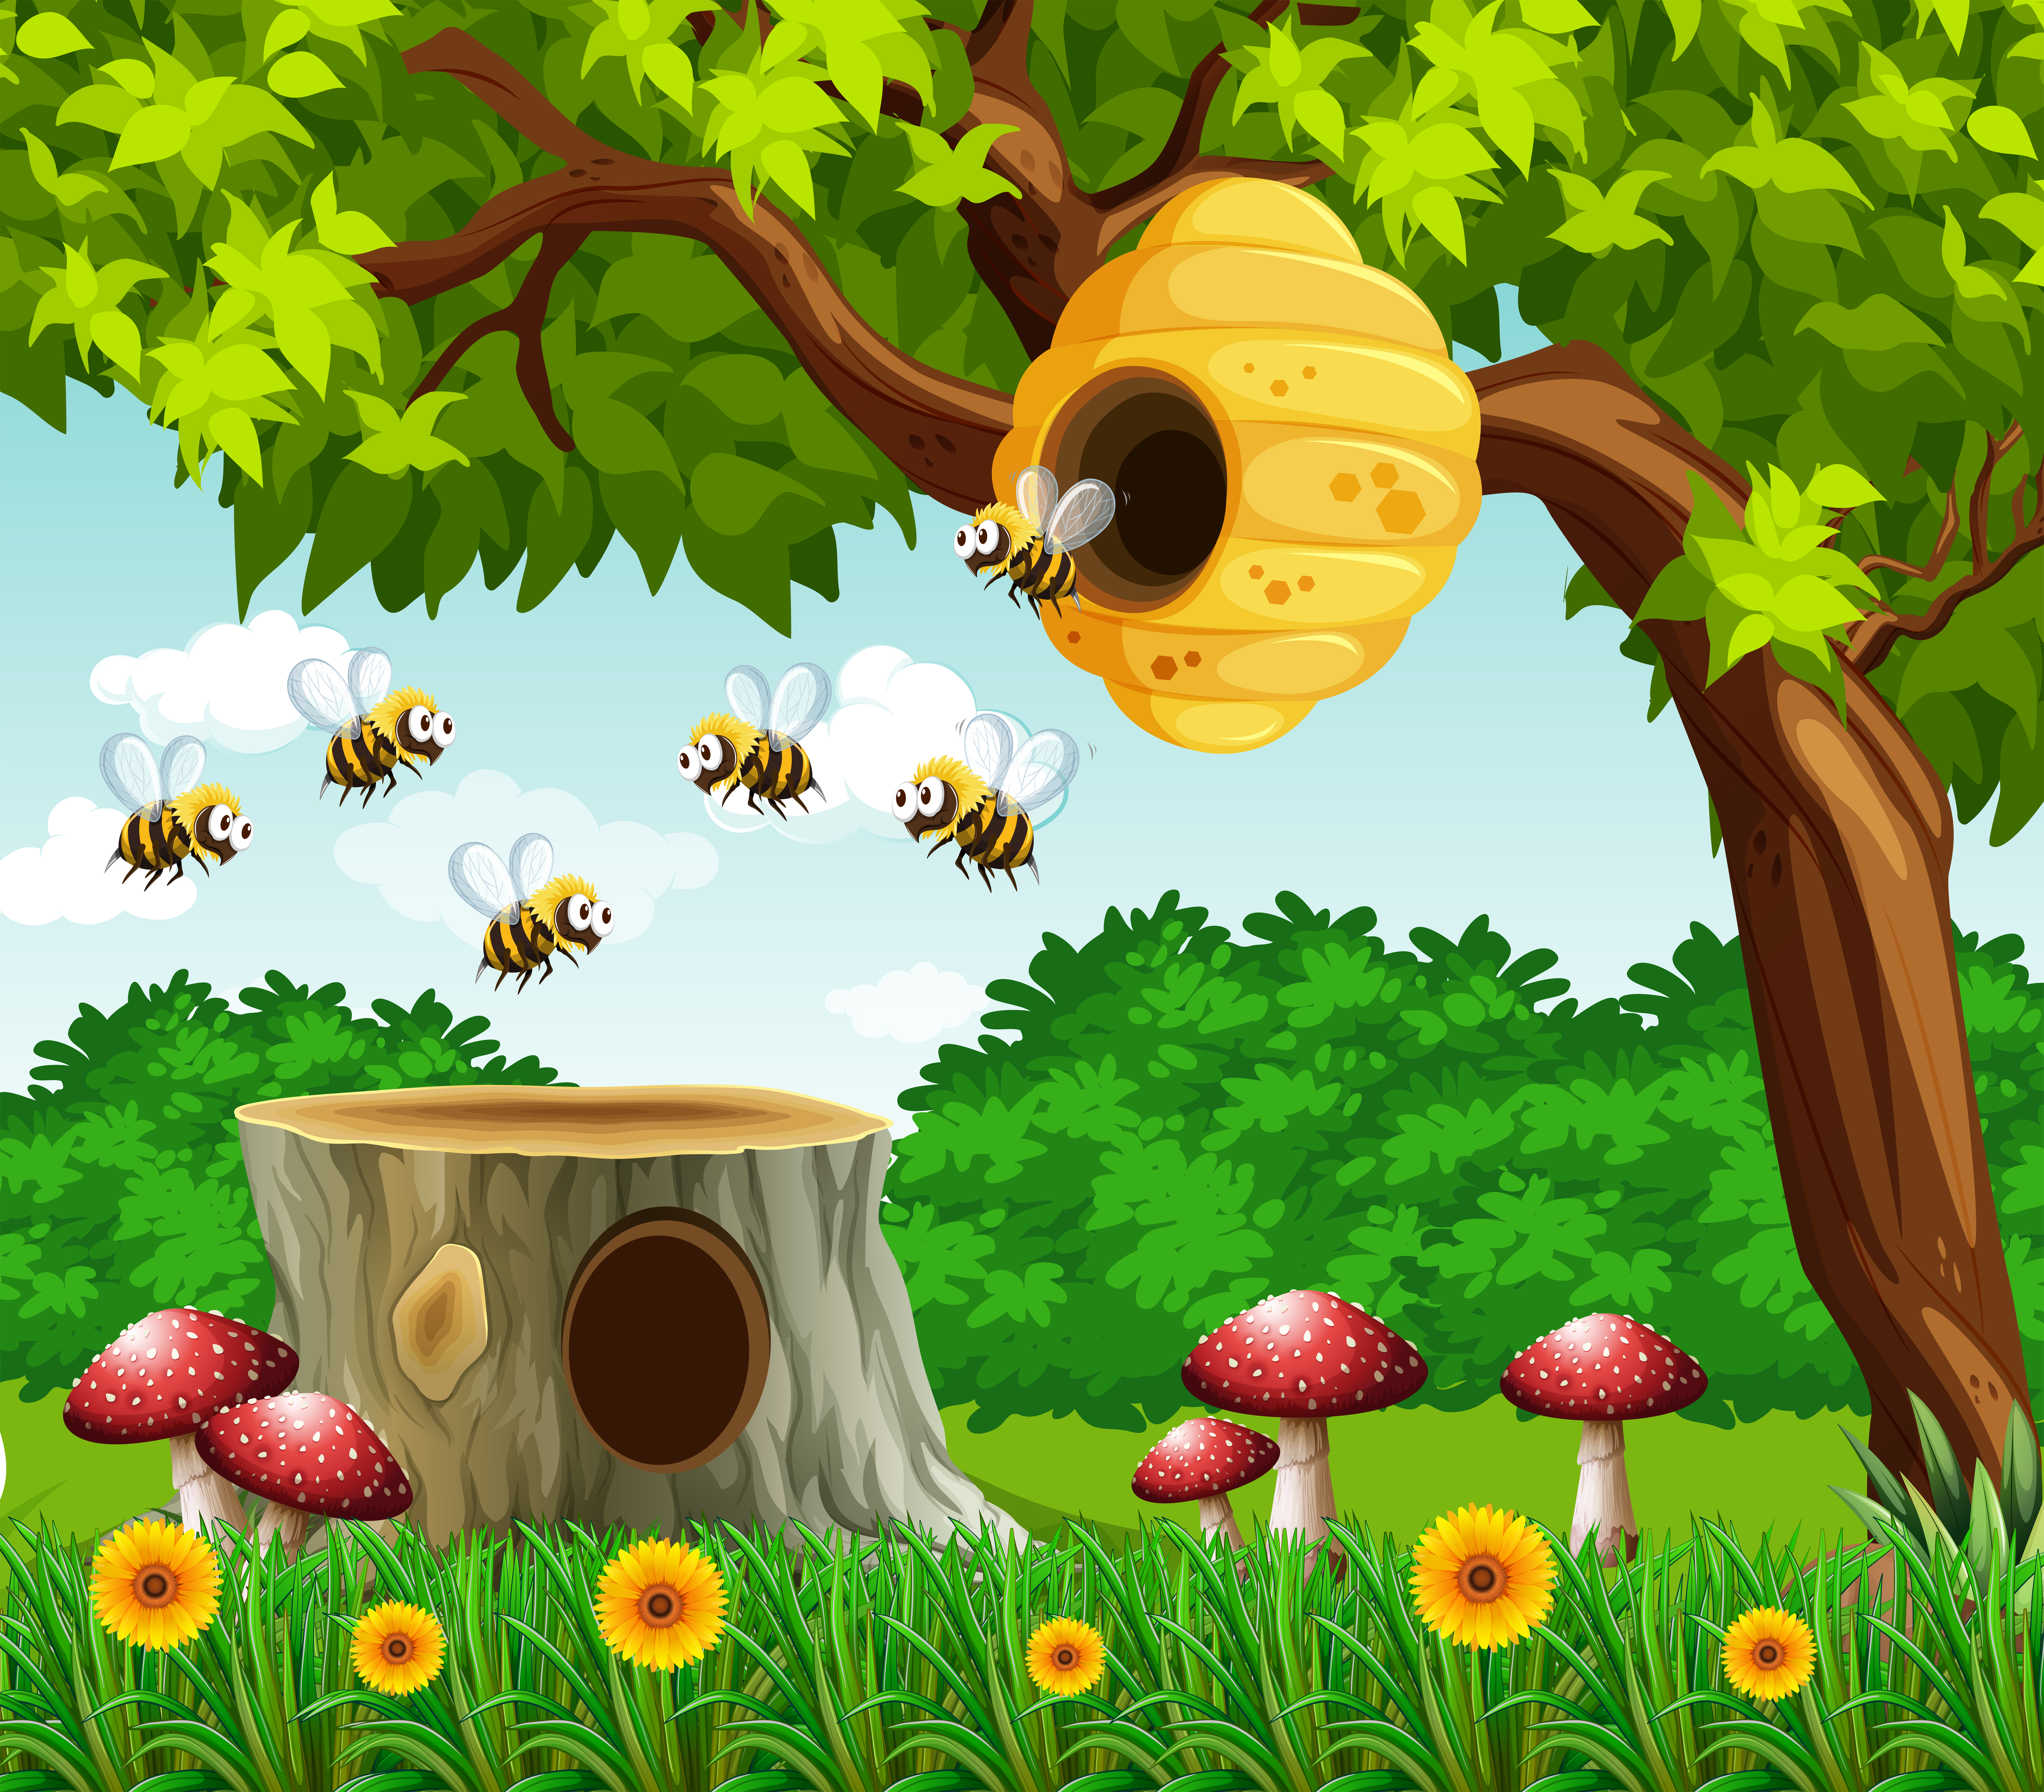 Download Garden scene with bees flying 296588 - Download Free ...